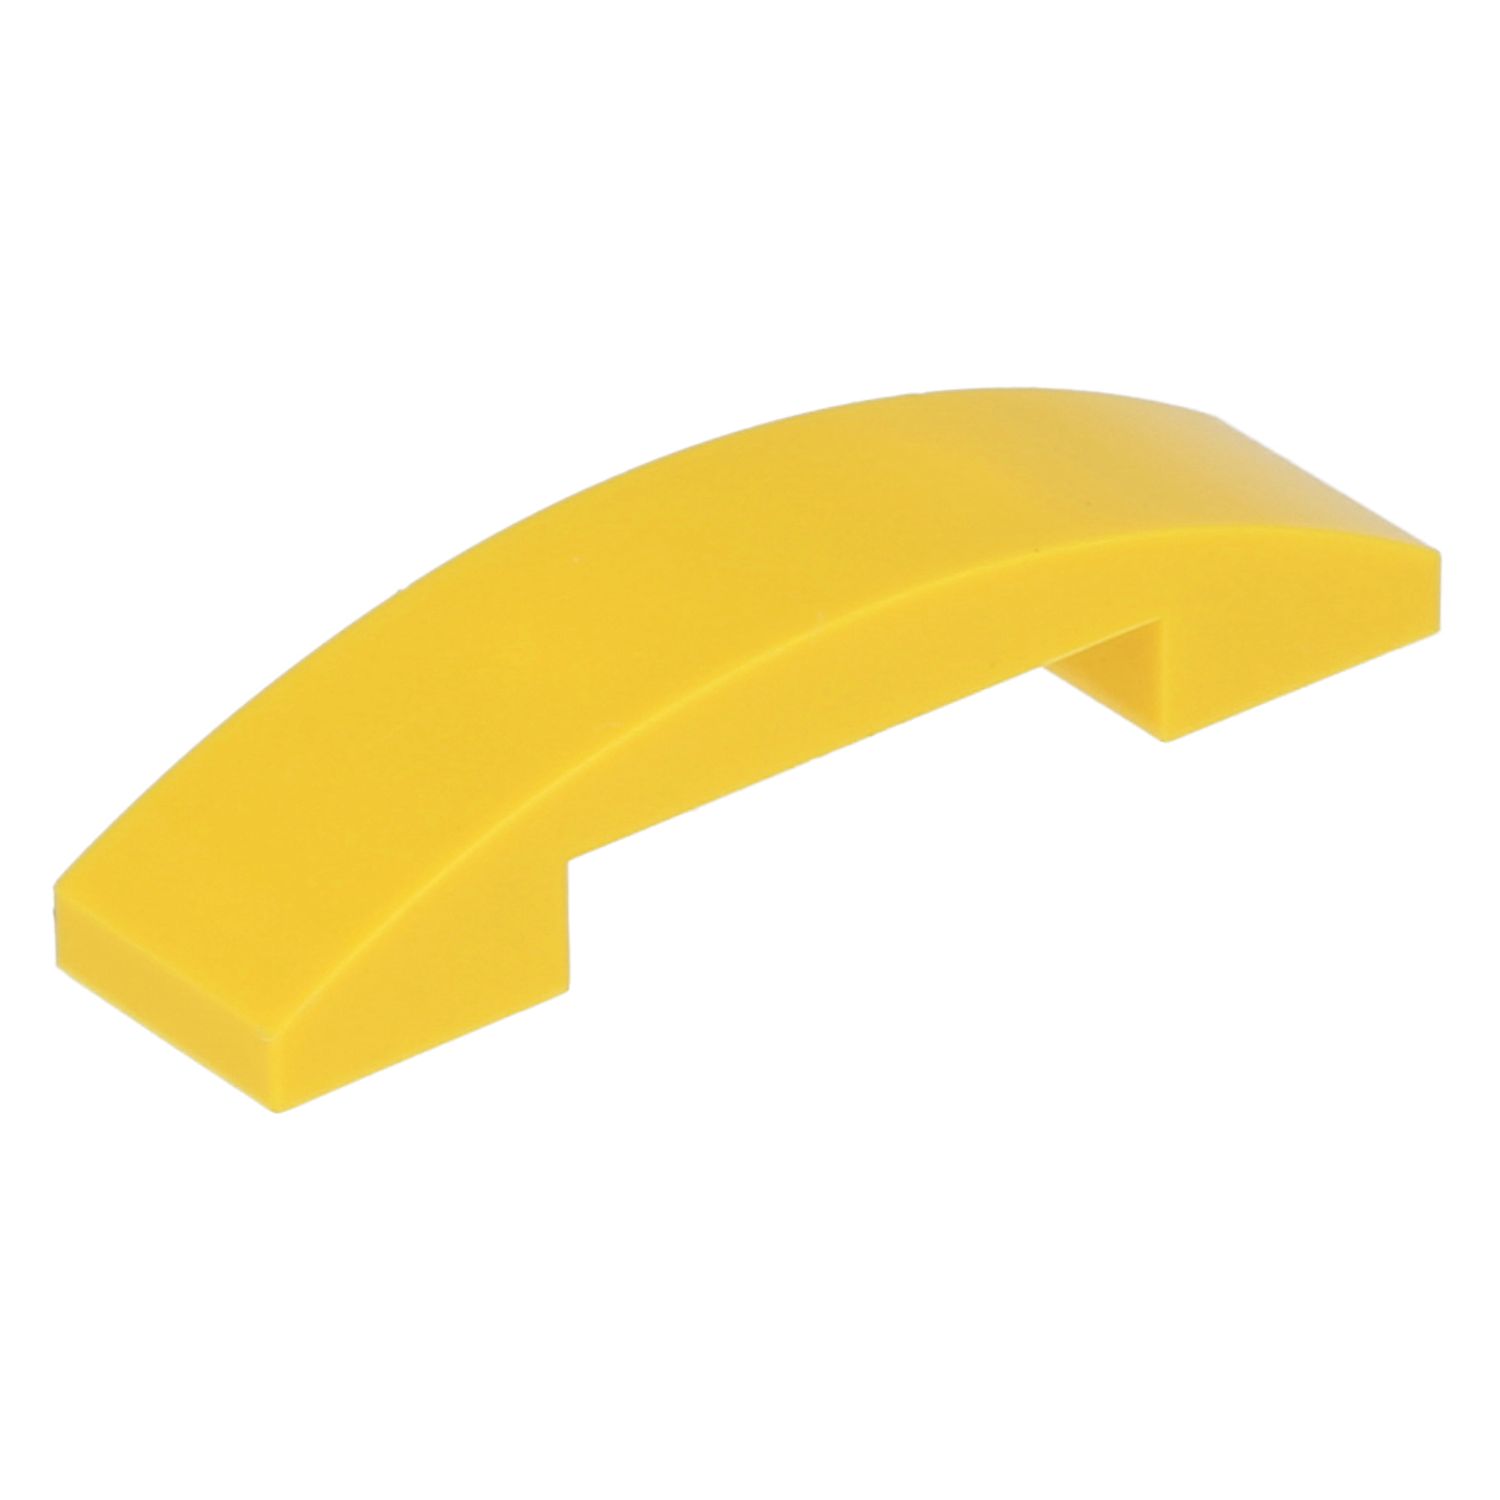 LEGO roof stones (modified) - slanted curved 4 x 1 x 2/3 double